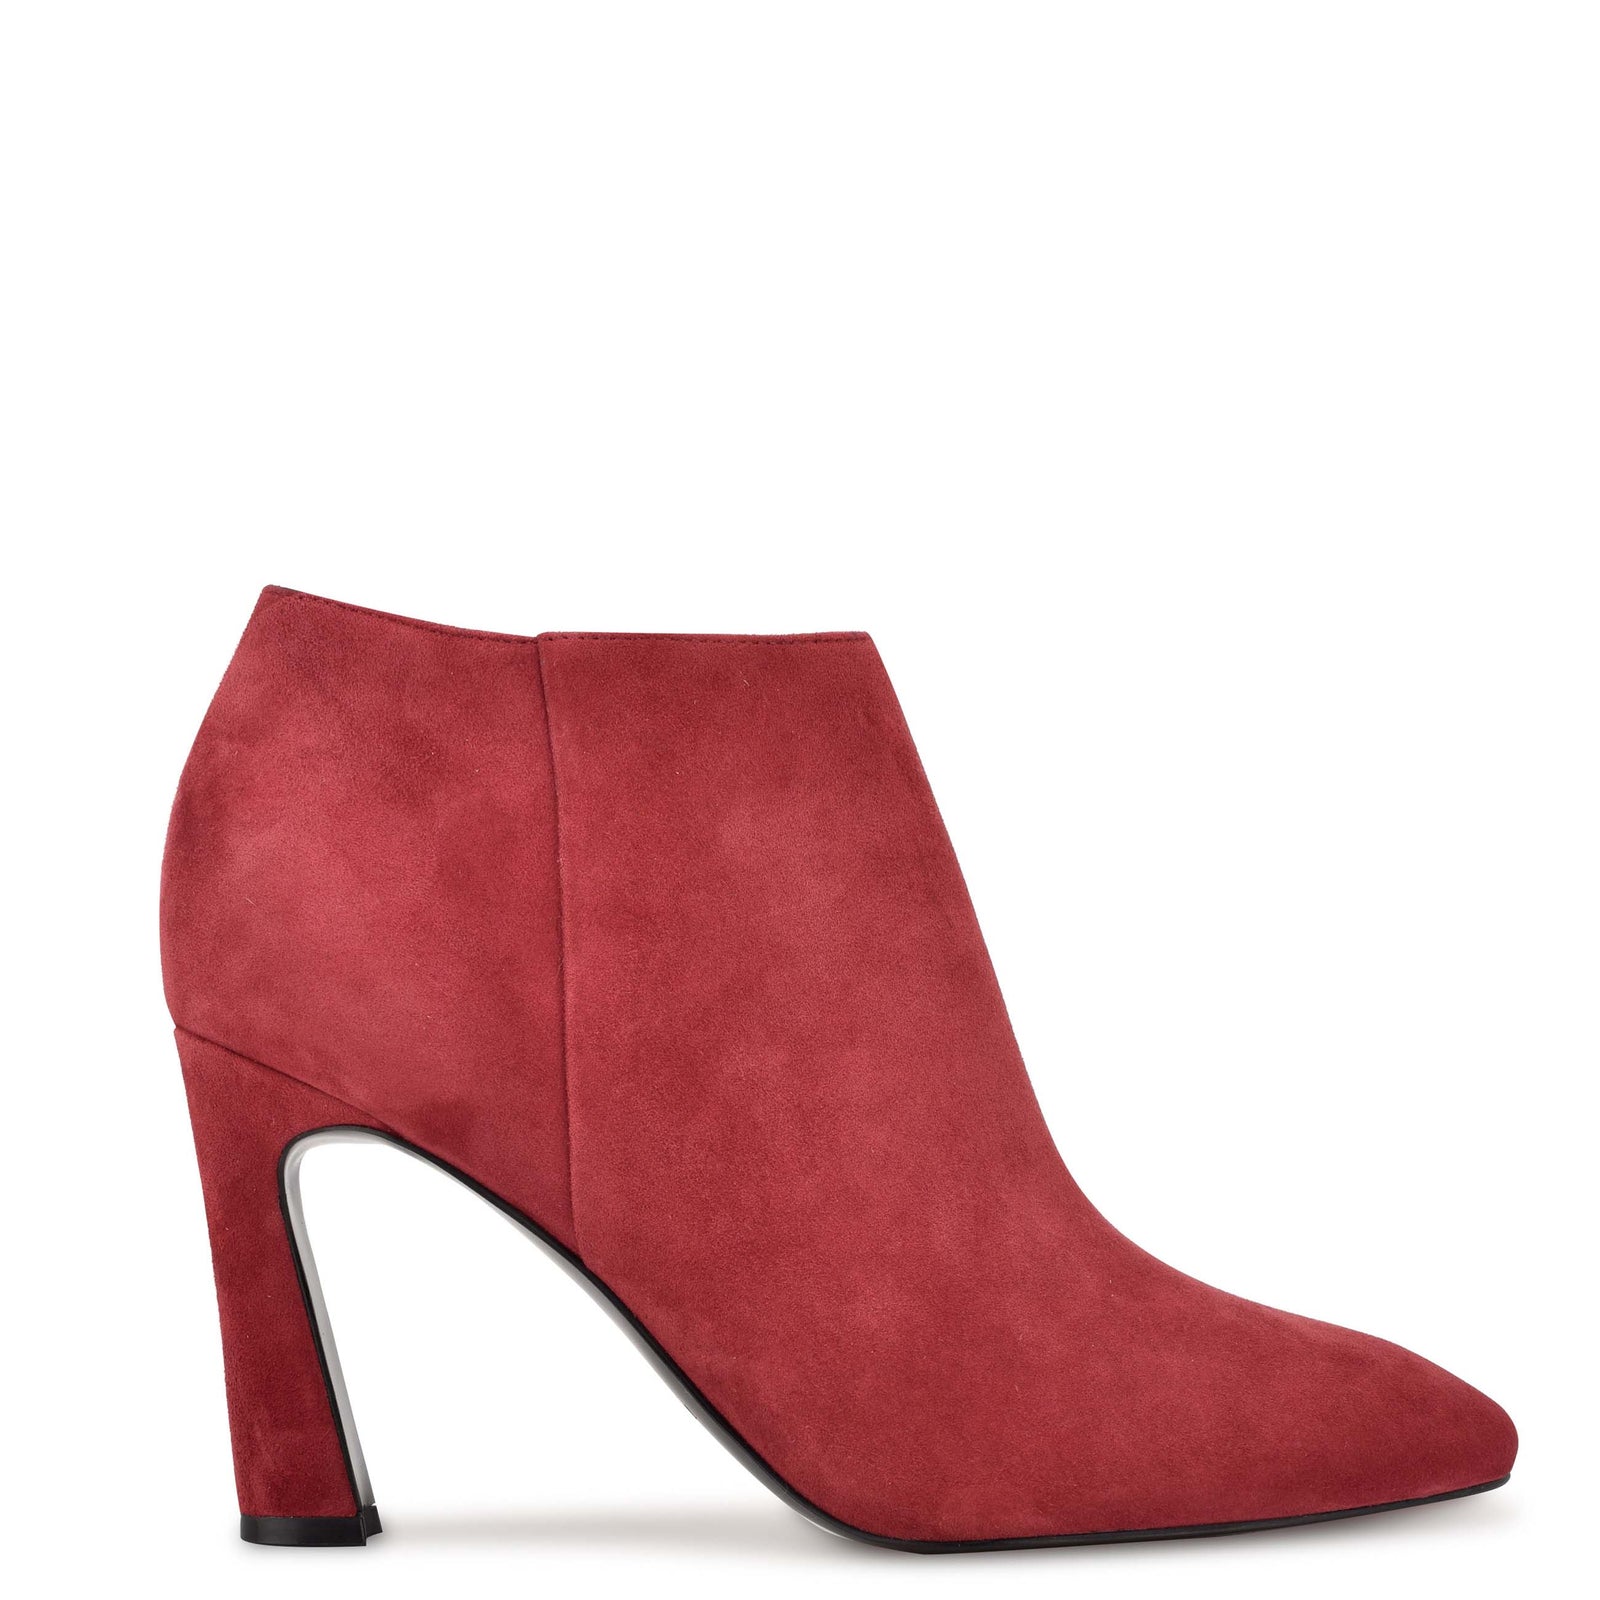 Boots & Booties | Nine West comfortable and fashionable shoes and ...